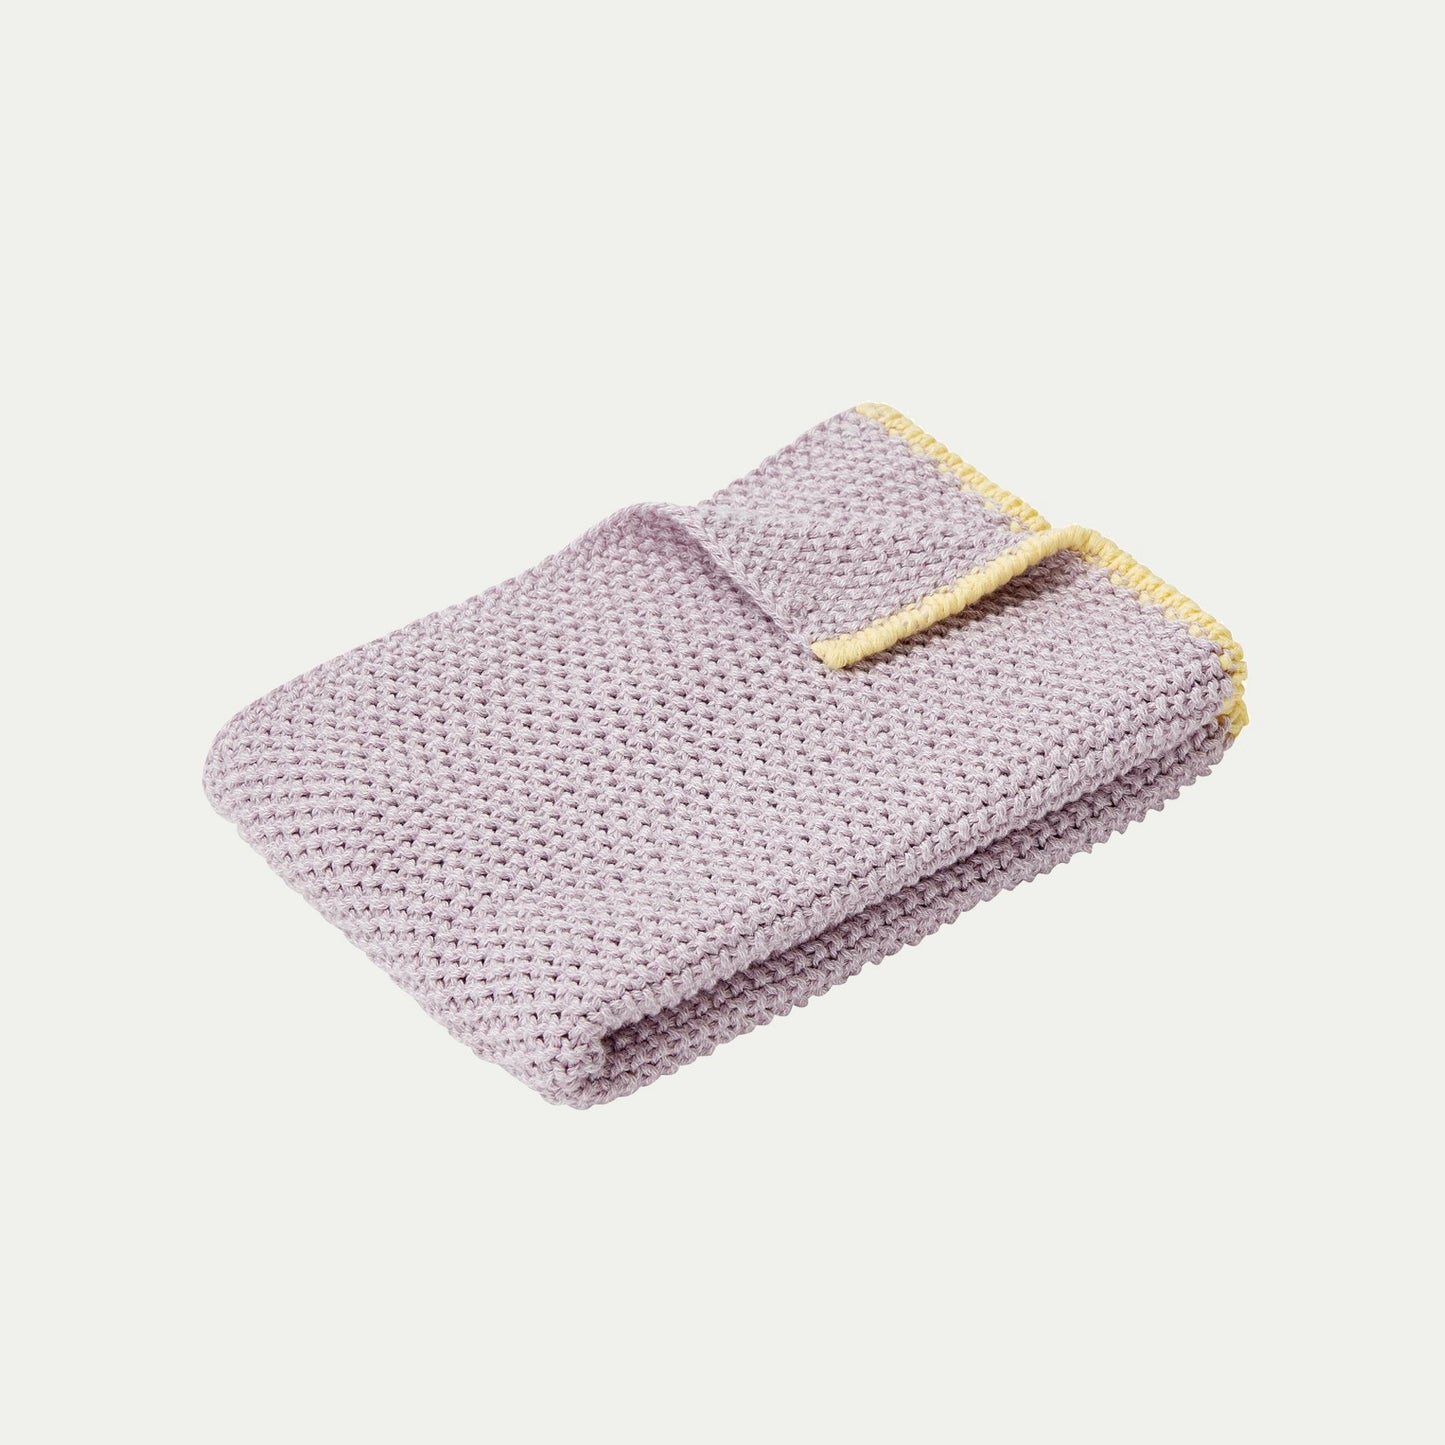 Hubsch Interior Scandi designer tea towel in lilac purple and yellow cotton knit on a white background